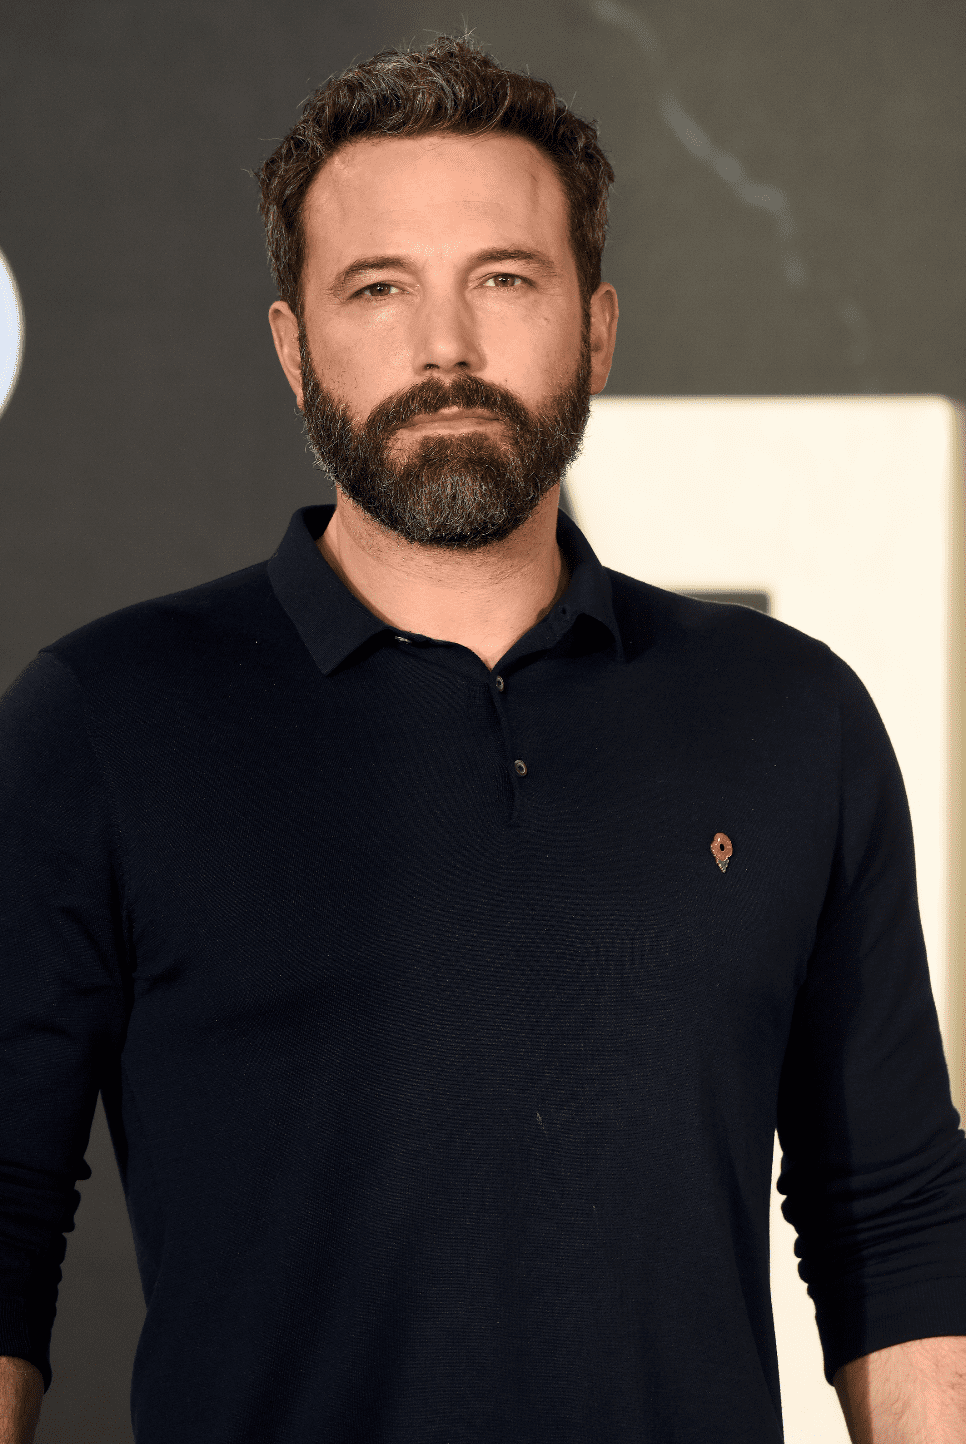 Ben Affleck attends the 'Justice League' photo call at The College on November 4, 2017 in London, England. | Source: Getty Images